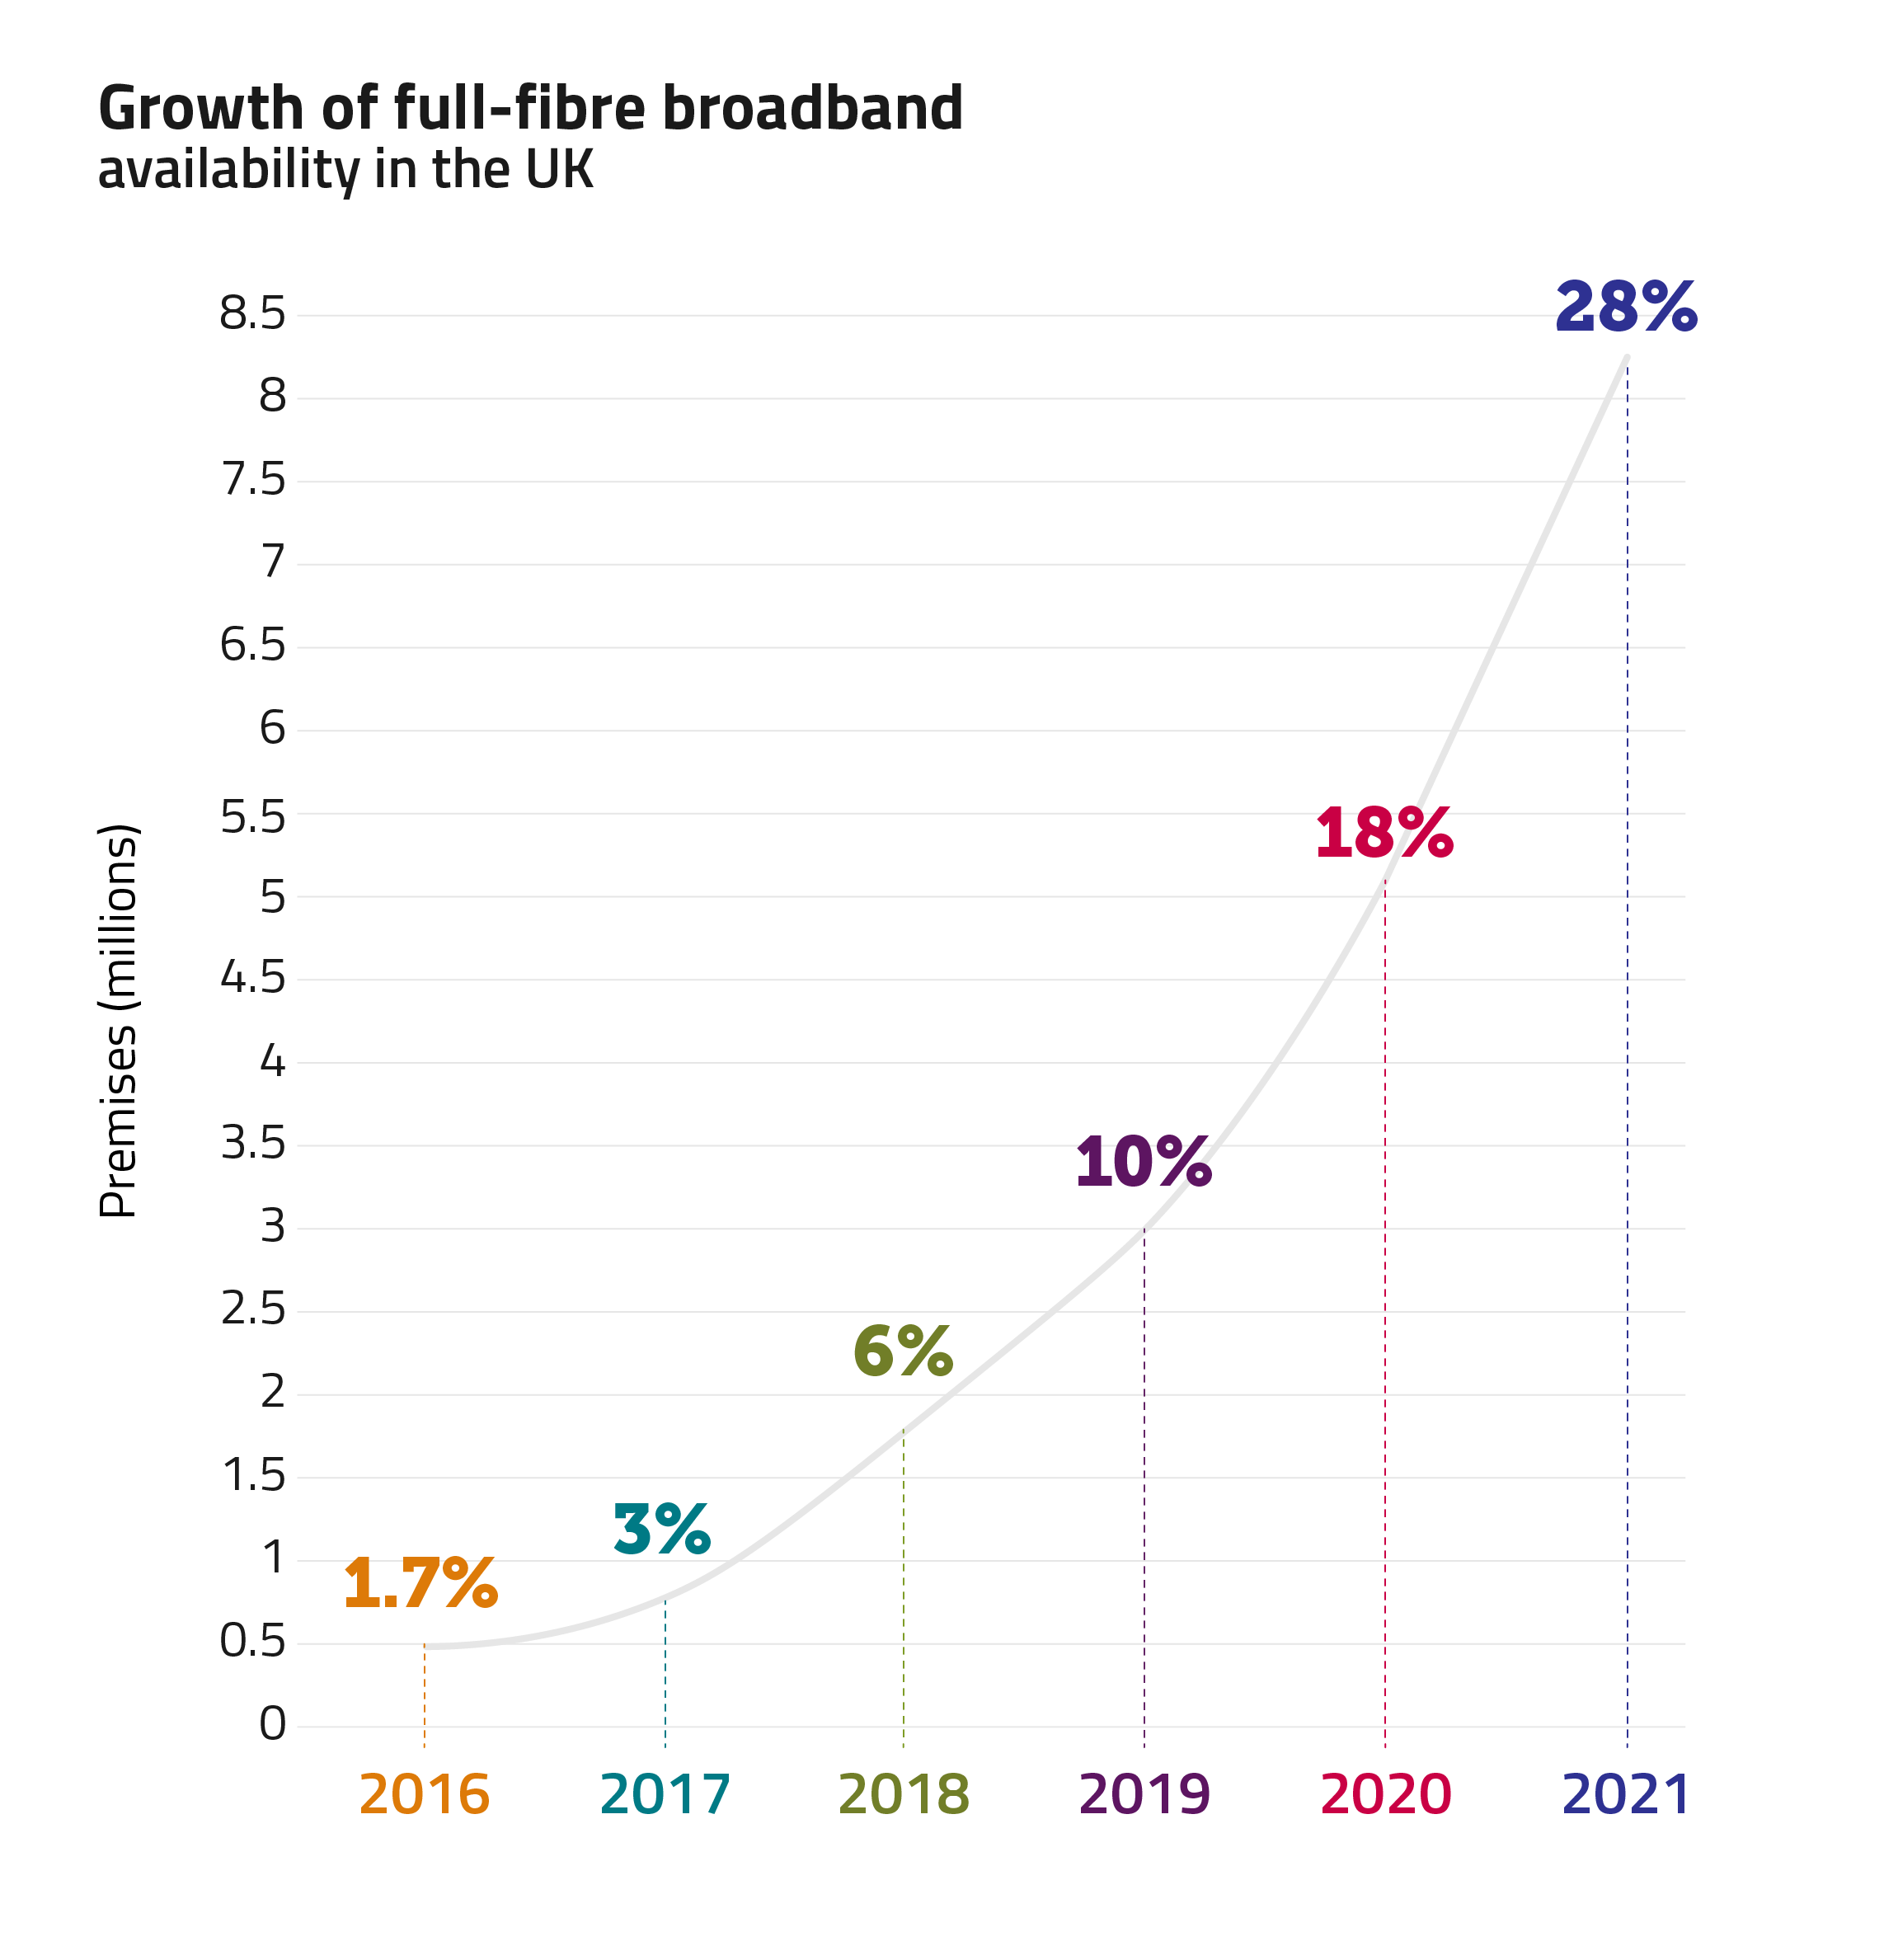 Growth of full-fibre broadband availability in the UK. More than 8 million homes (28%) can now get full-fibre broadband.